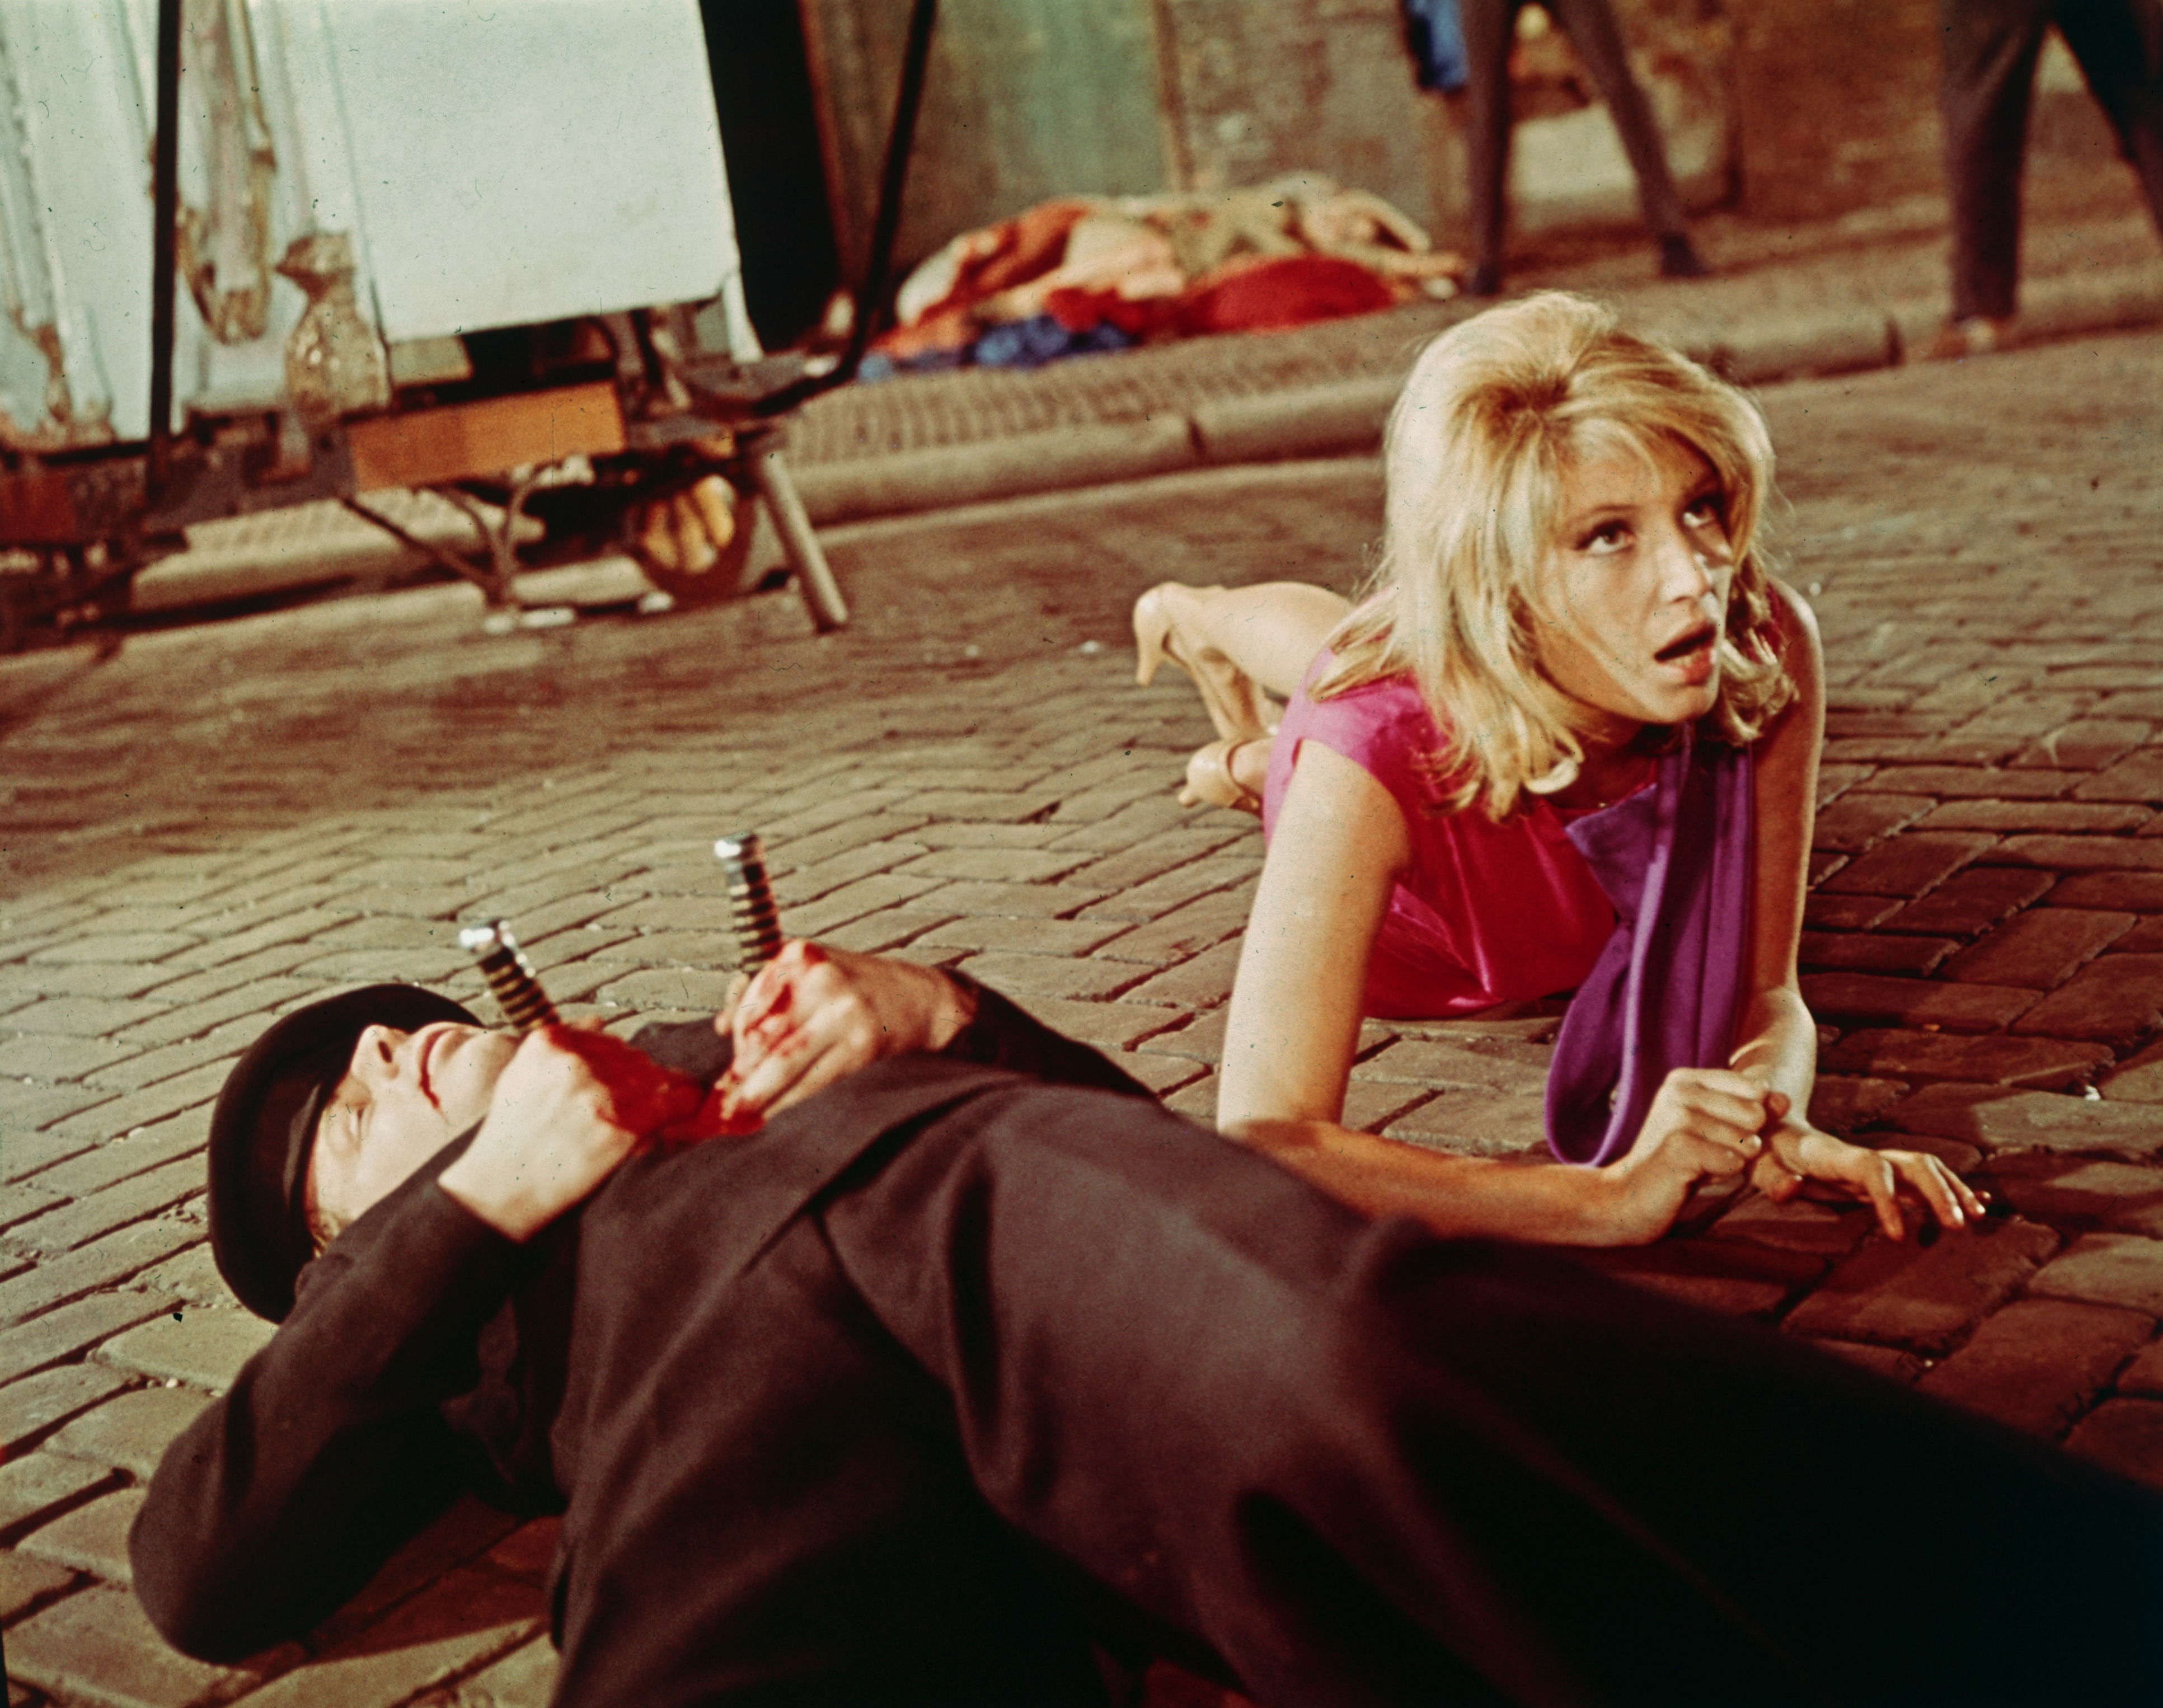 <p>Based on the London Evening Standard comic strip, this Joseph Losey-directed spy flick is the first English-language showcase for Italian beauty Monica Vitti. It’s episodic, and rather flat as satire, but Vitti is always stunning in a variety of imaginative costumes. If some of that design inventiveness went into the writing of the script, this might’ve been more than a curiosity.  </p><p><a href='https://www.msn.com/en-us/community/channel/vid-cj9pqbr0vn9in2b6ddcd8sfgpfq6x6utp44fssrv6mc2gtybw0us'>Follow us on MSN to see more of our exclusive entertainment content.</a></p>